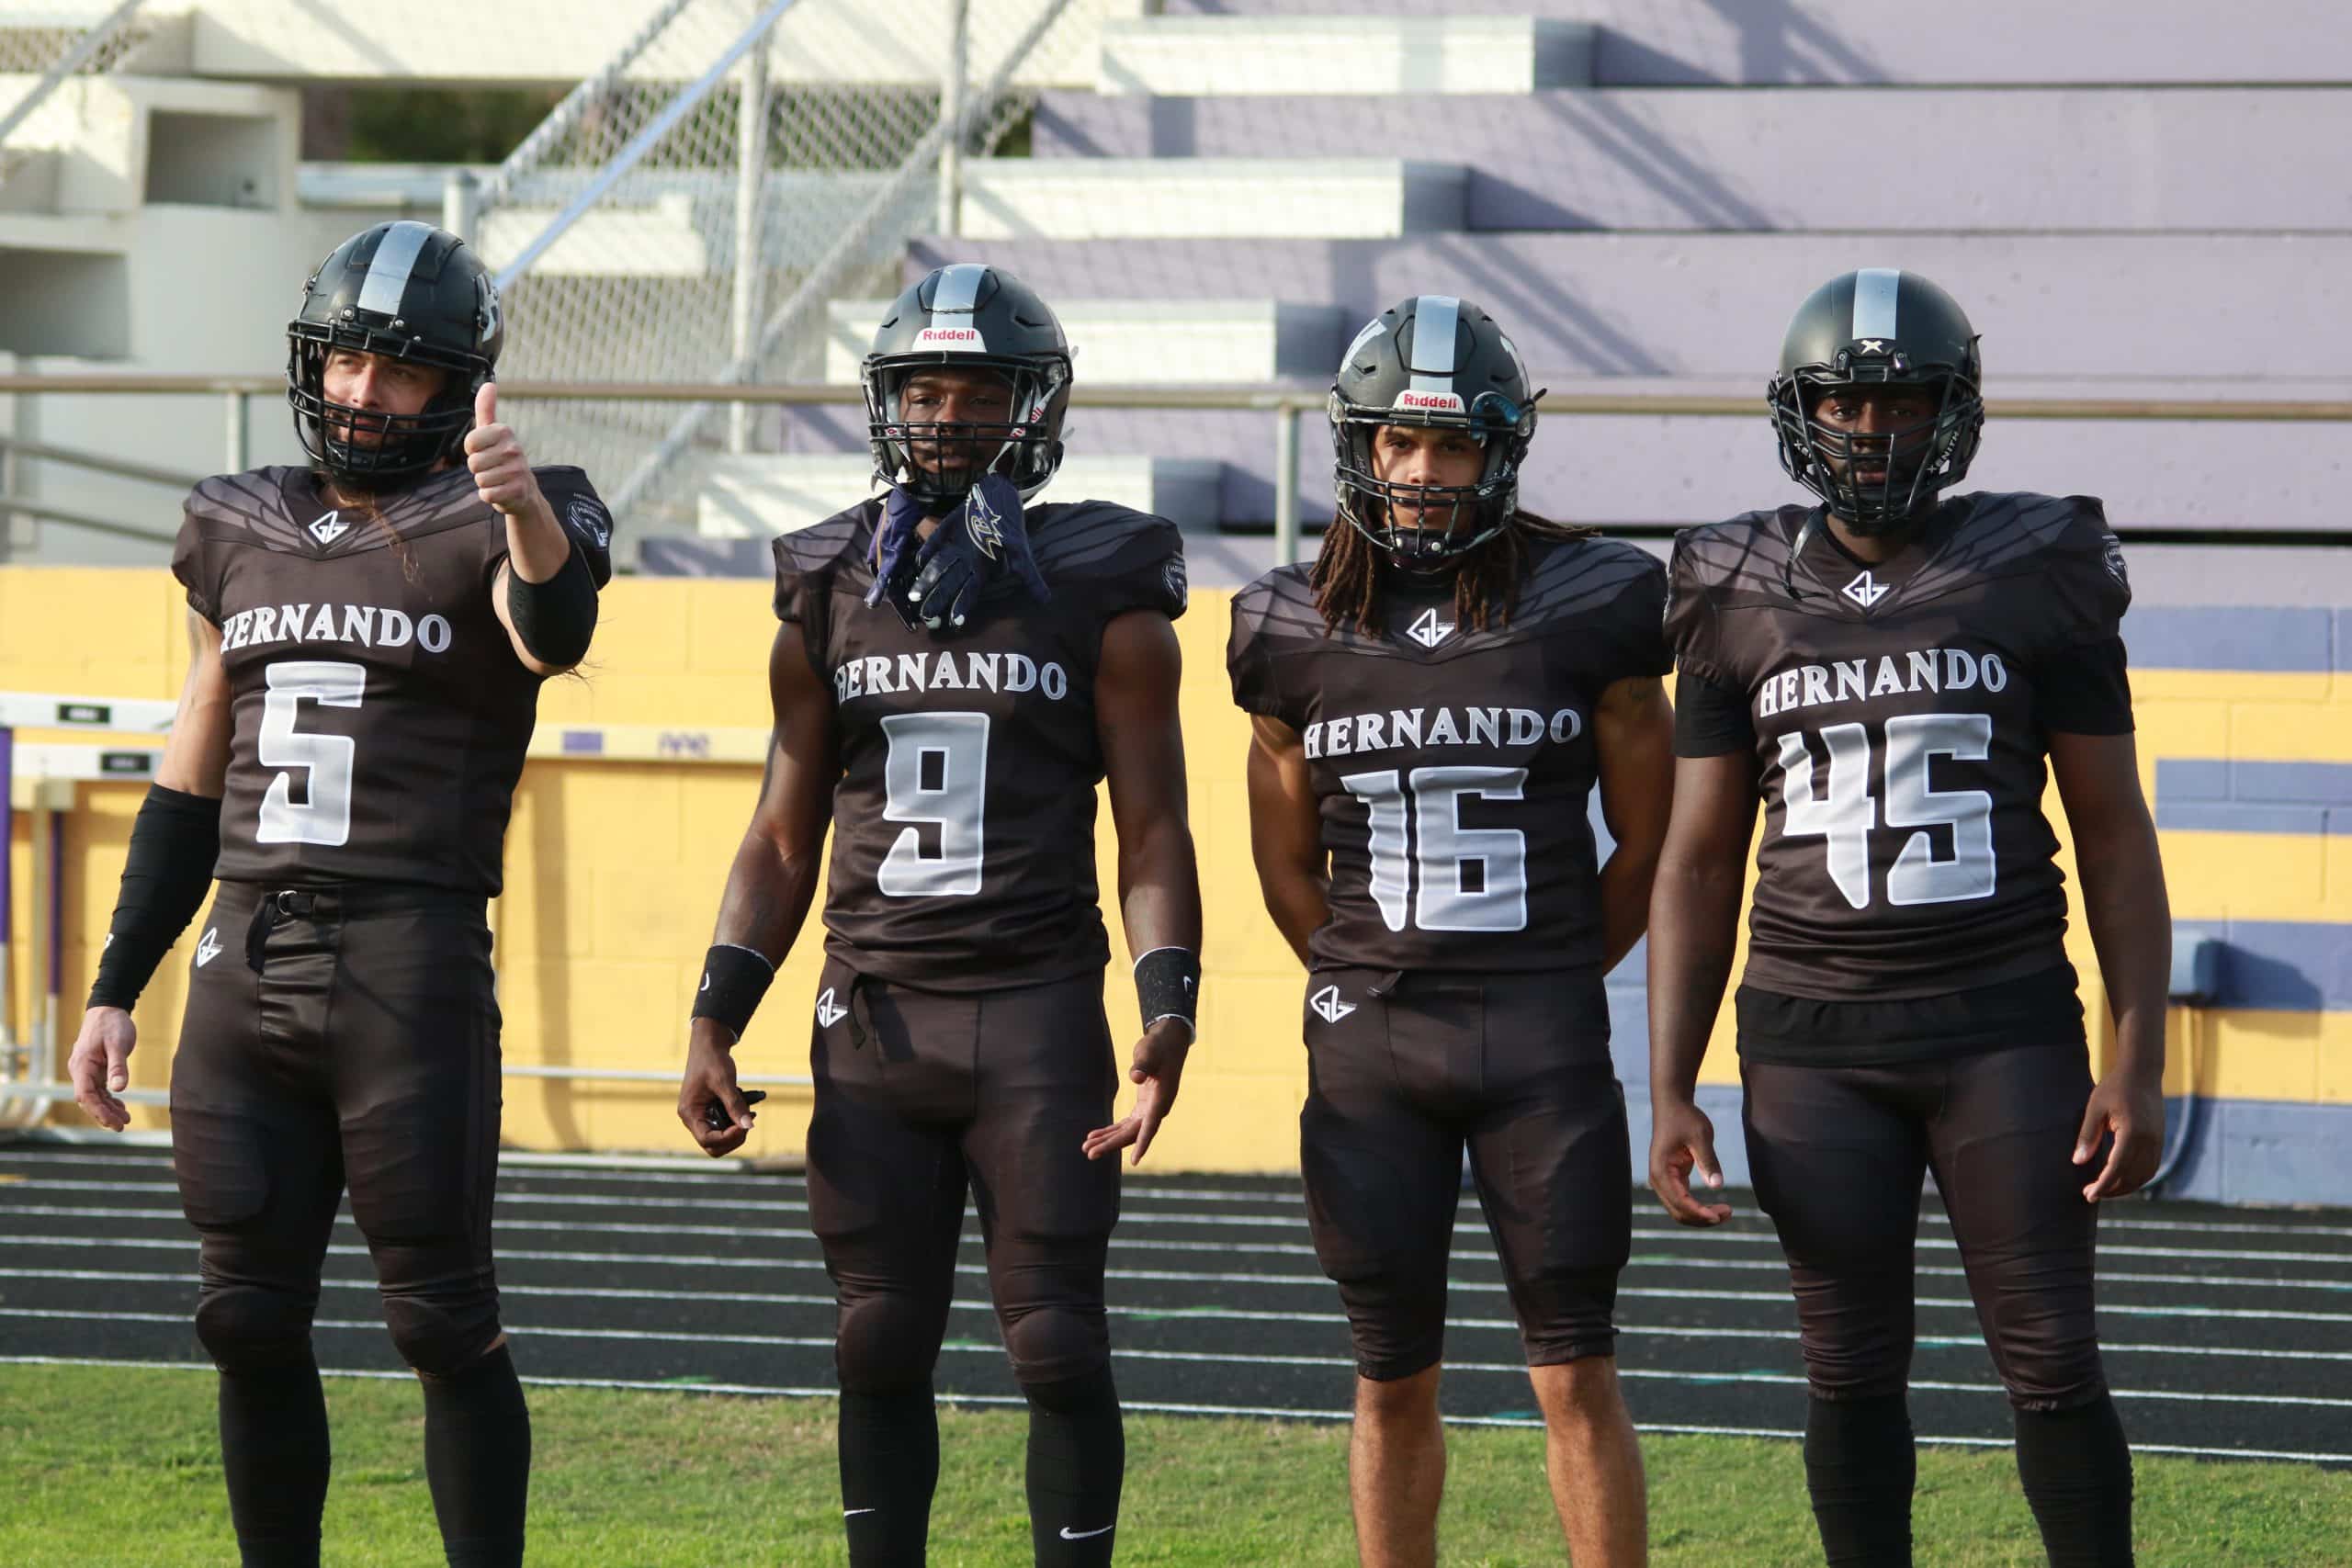 Captains for Saturday's game Reapers vs Hawks. From left to right. #5 Christopher Ferguson, #9 Kaleb Browdy, #16 Isaiah Howard and #45 Keyshawn Gaddy.